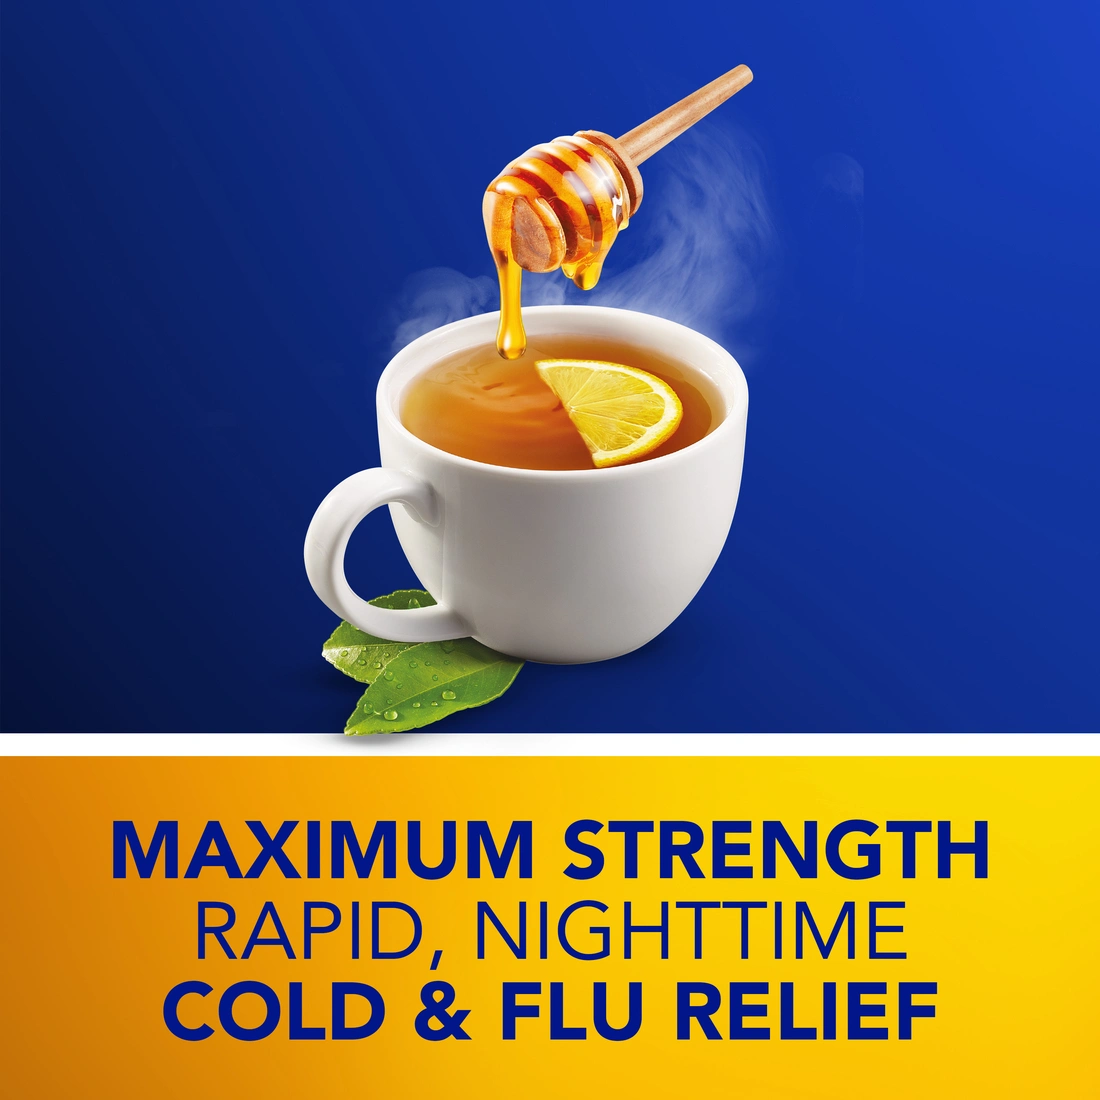 NyQuil™ Hot Remedy Cold & Flu + Congestion Relief Hot Drink Powder Medicine